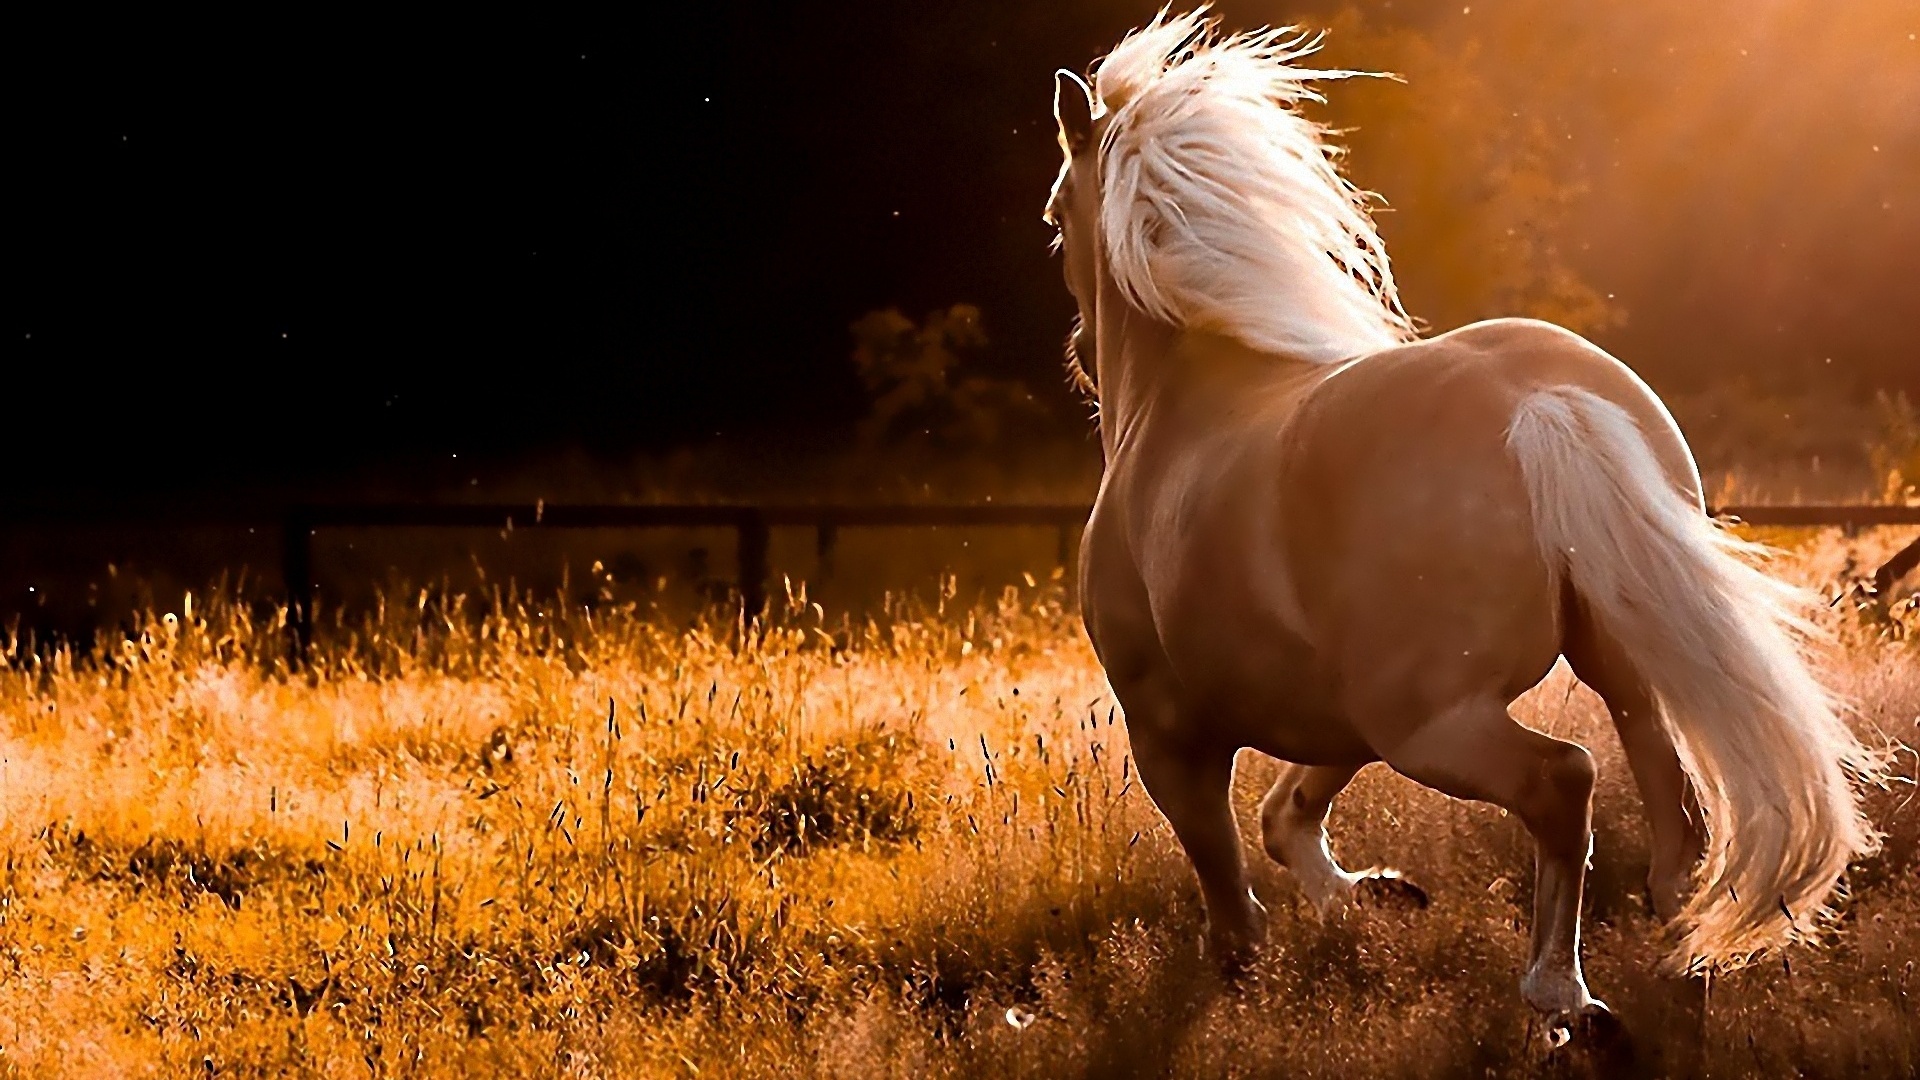 horse wallpapers nice